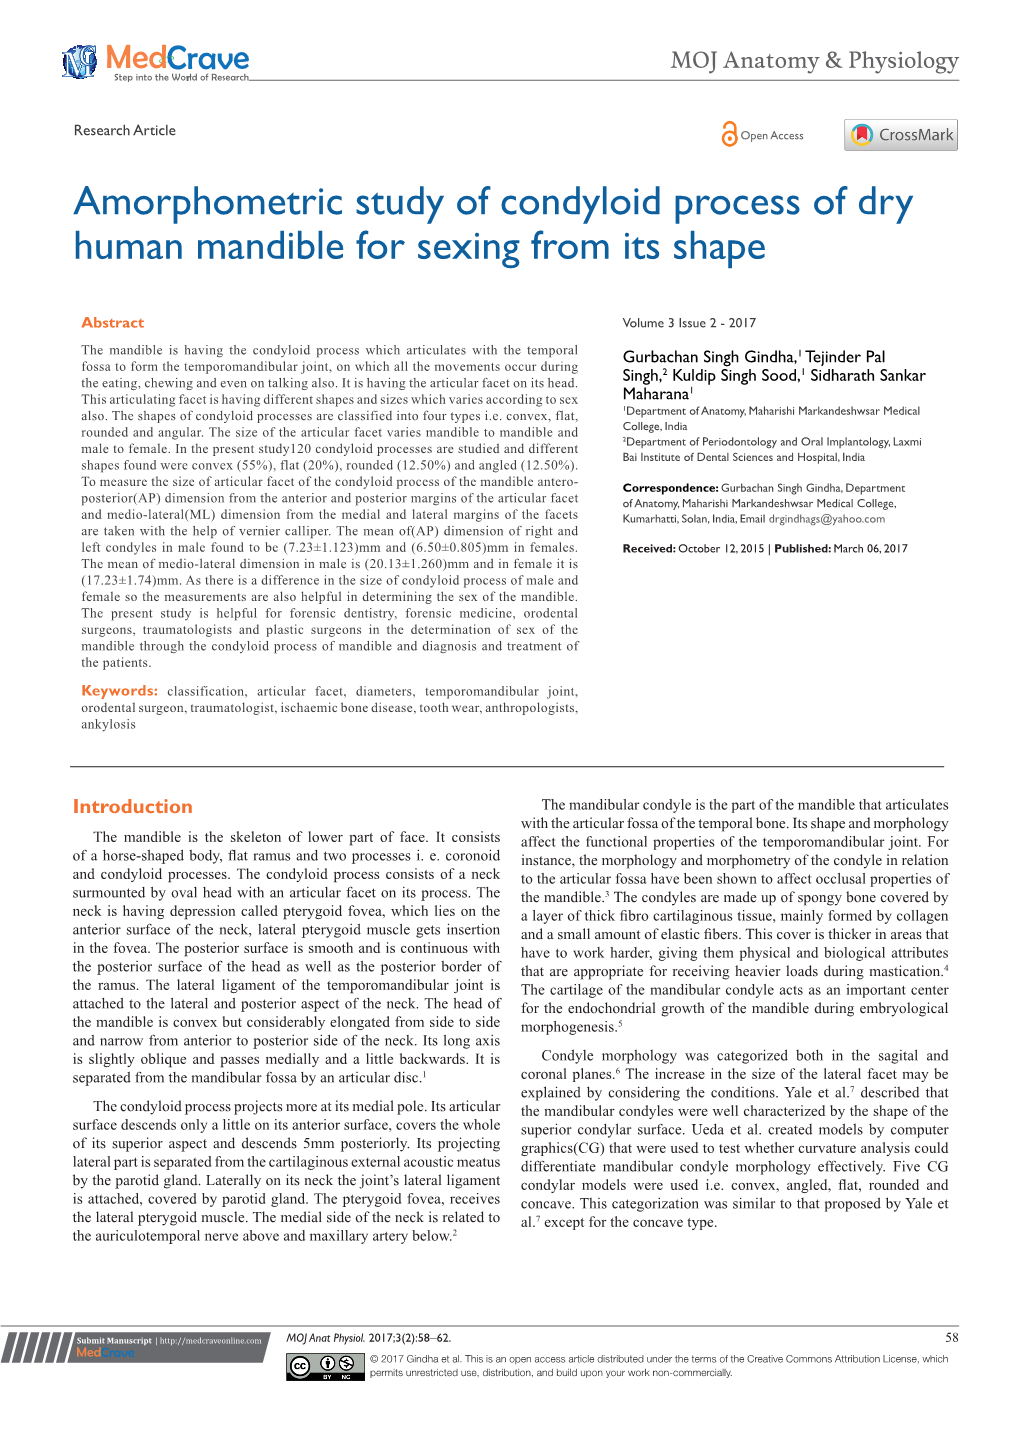 Amorphometric Study of Condyloid Process of Dry Human Mandible for Sexing from Its Shape